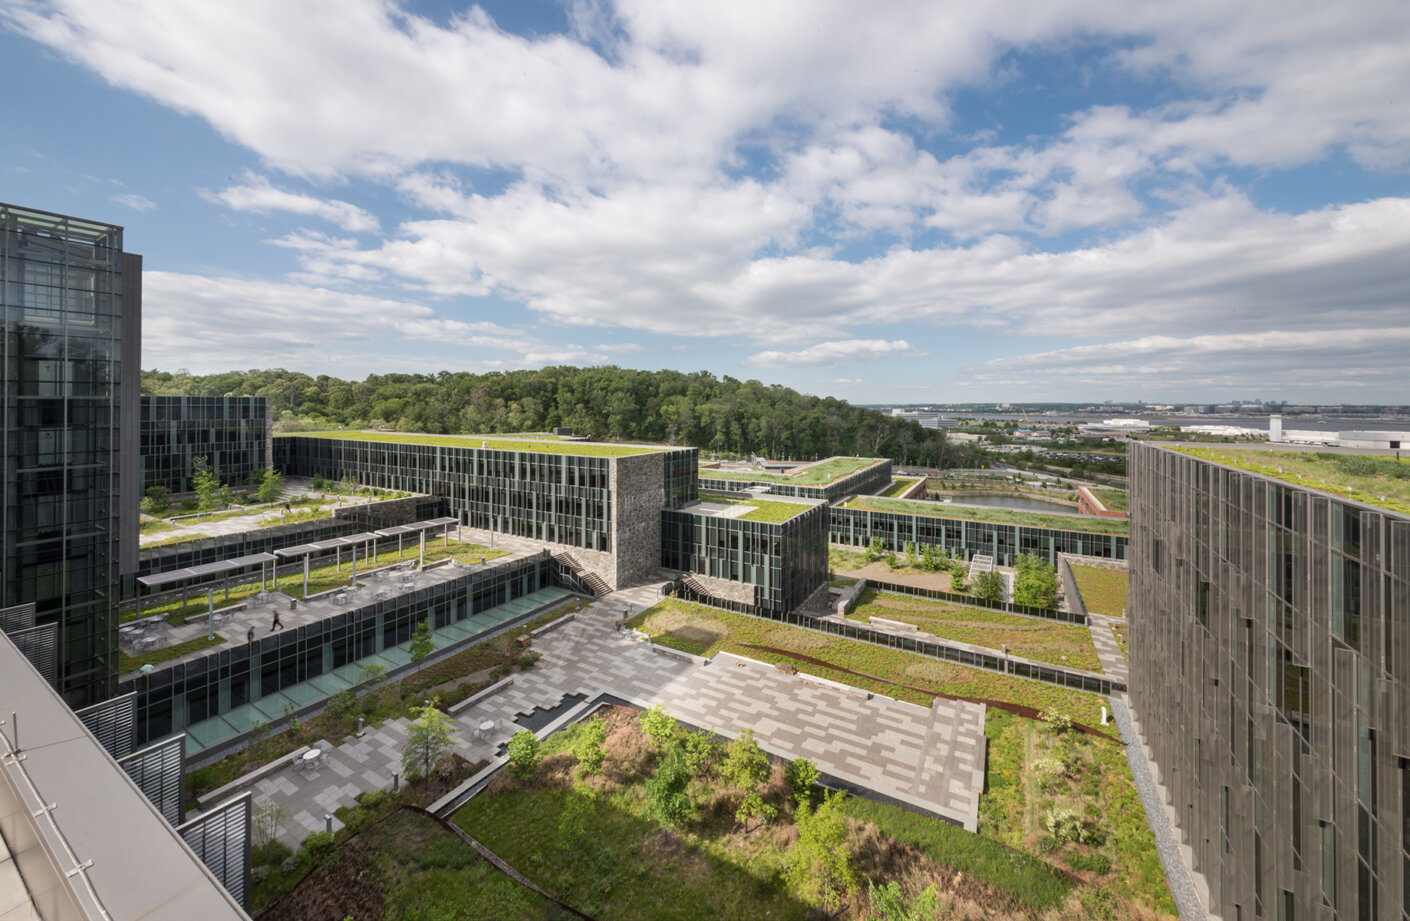 One of the largest green roofs in the world